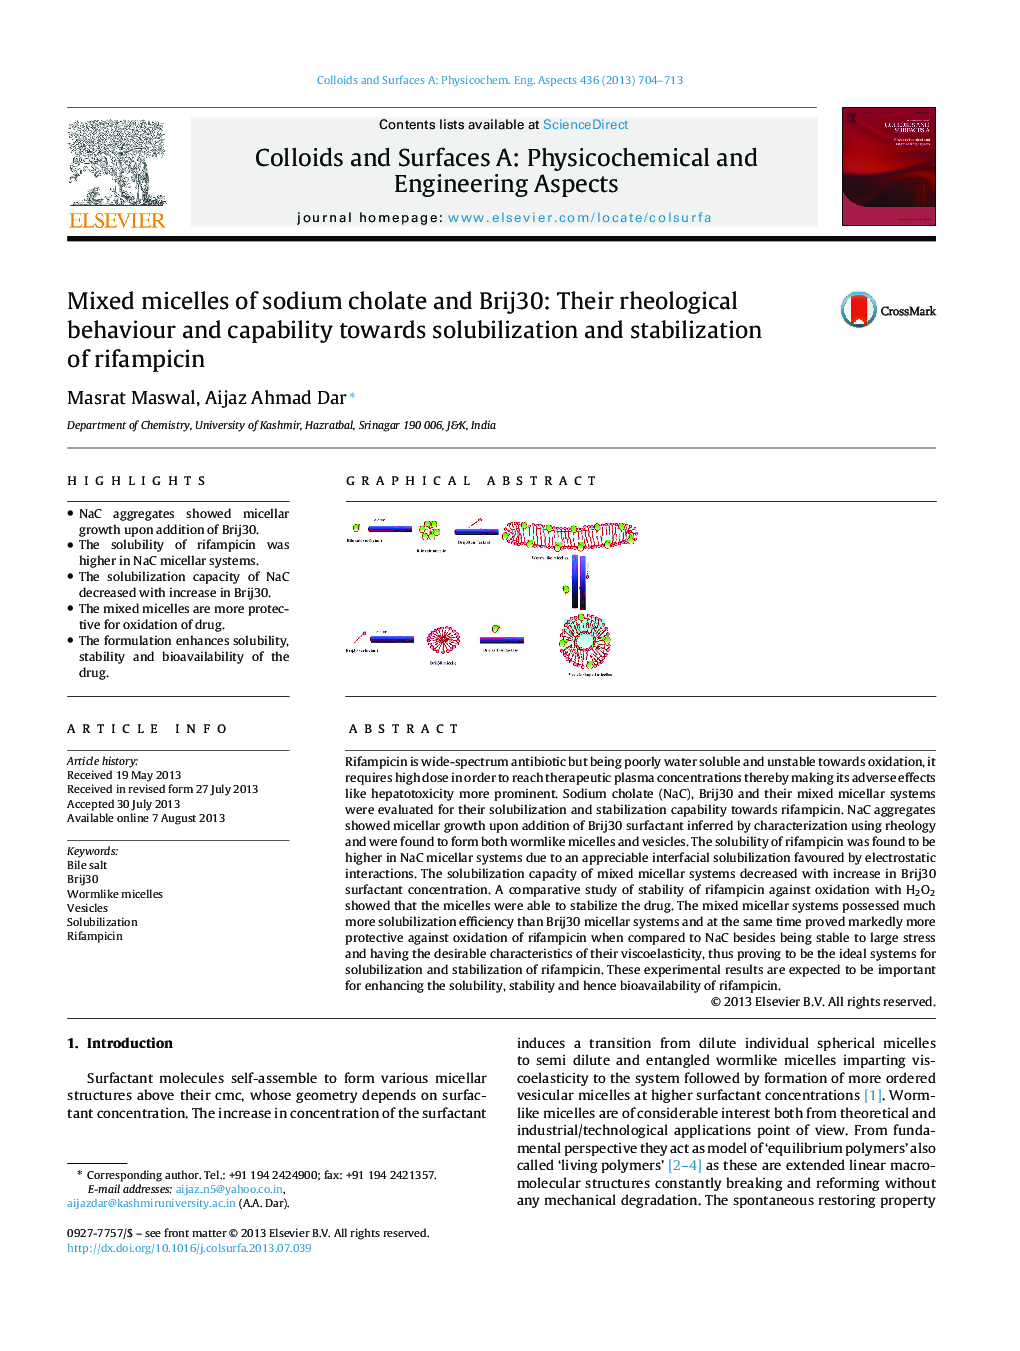 Mixed micelles of sodium cholate and Brij30: Their rheological behaviour and capability towards solubilization and stabilization of rifampicin